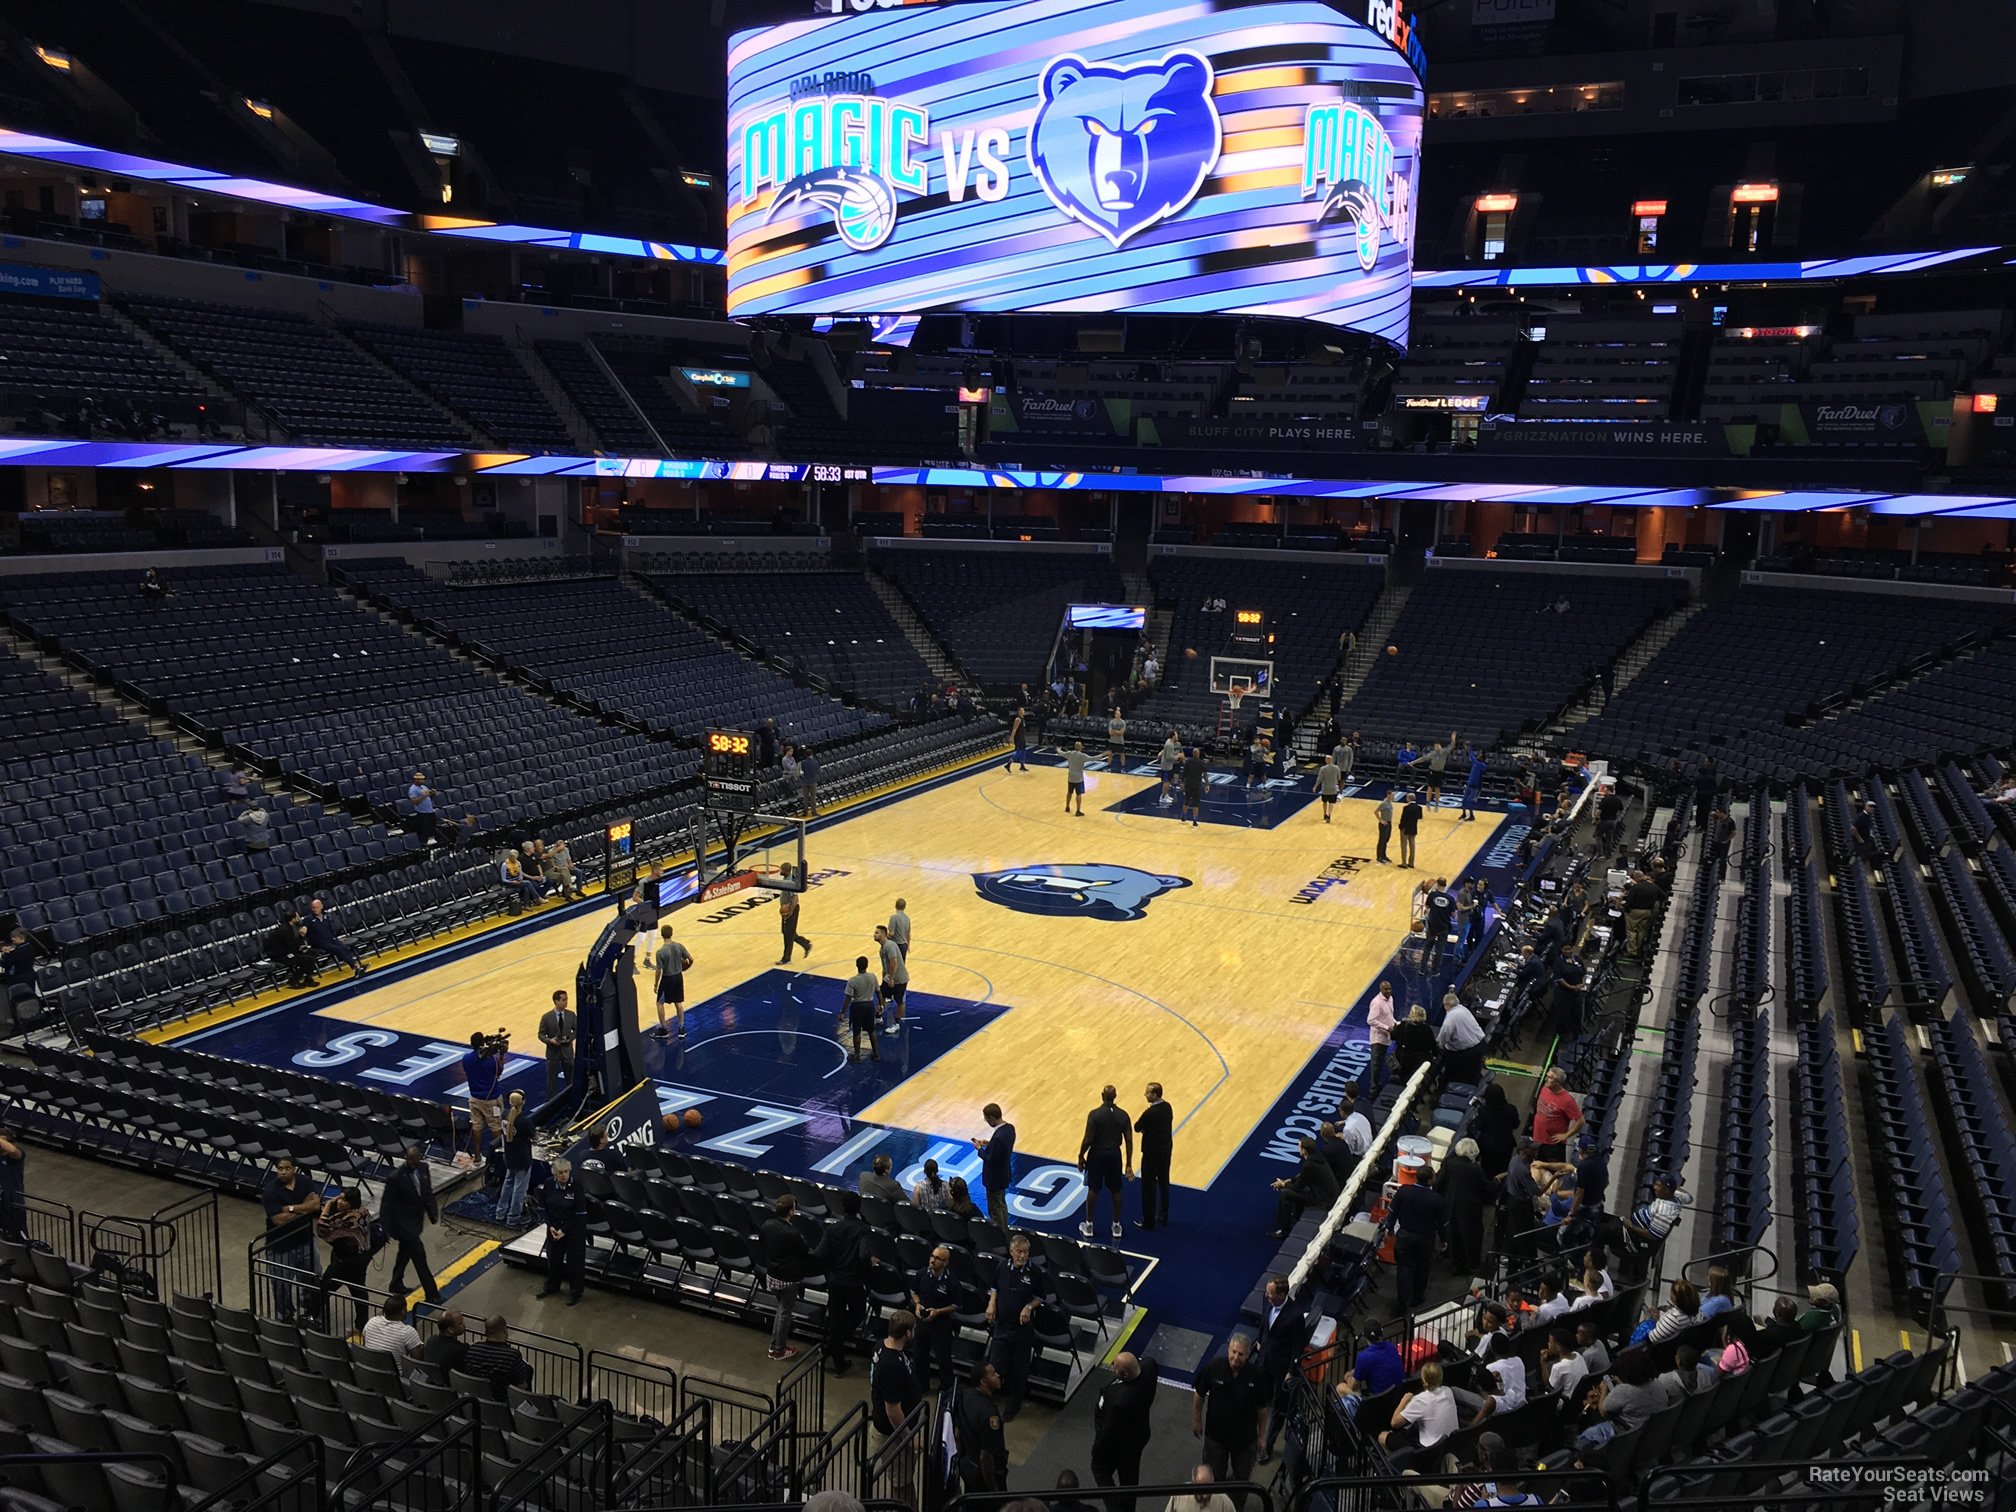 Fedex Forum Seating Chart For Grizzlies Games